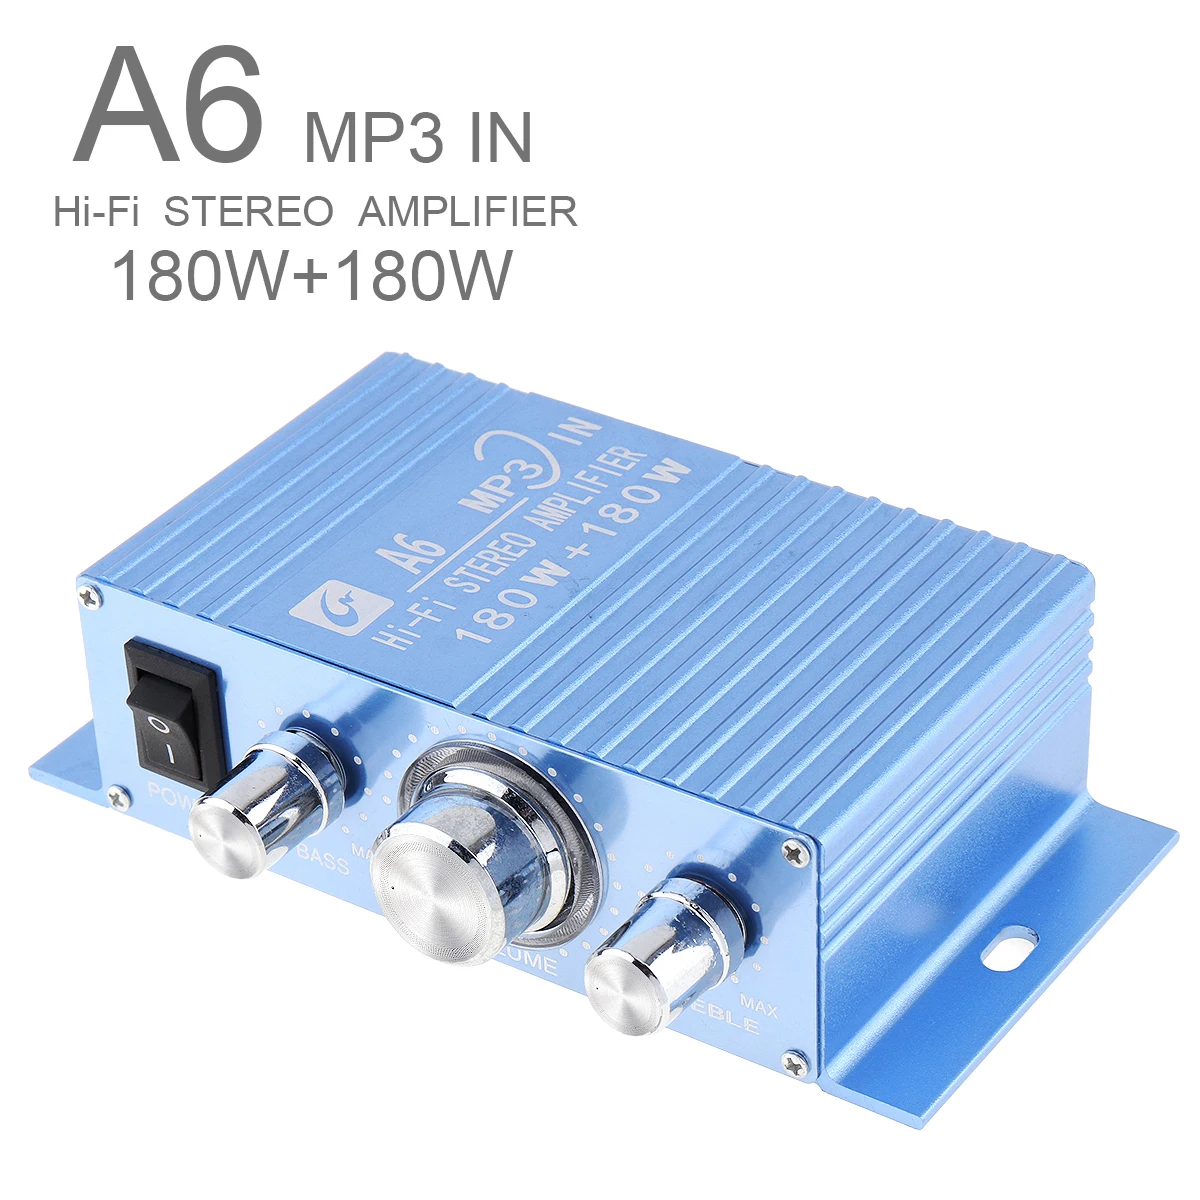 A6 Power Amplifier DC 12V 2.0 Channel Hi-Fi Stereo Amplifier Subwoofer with 3.5AUX Interface for Car/PC/ Speakers/CD/Motorcycle